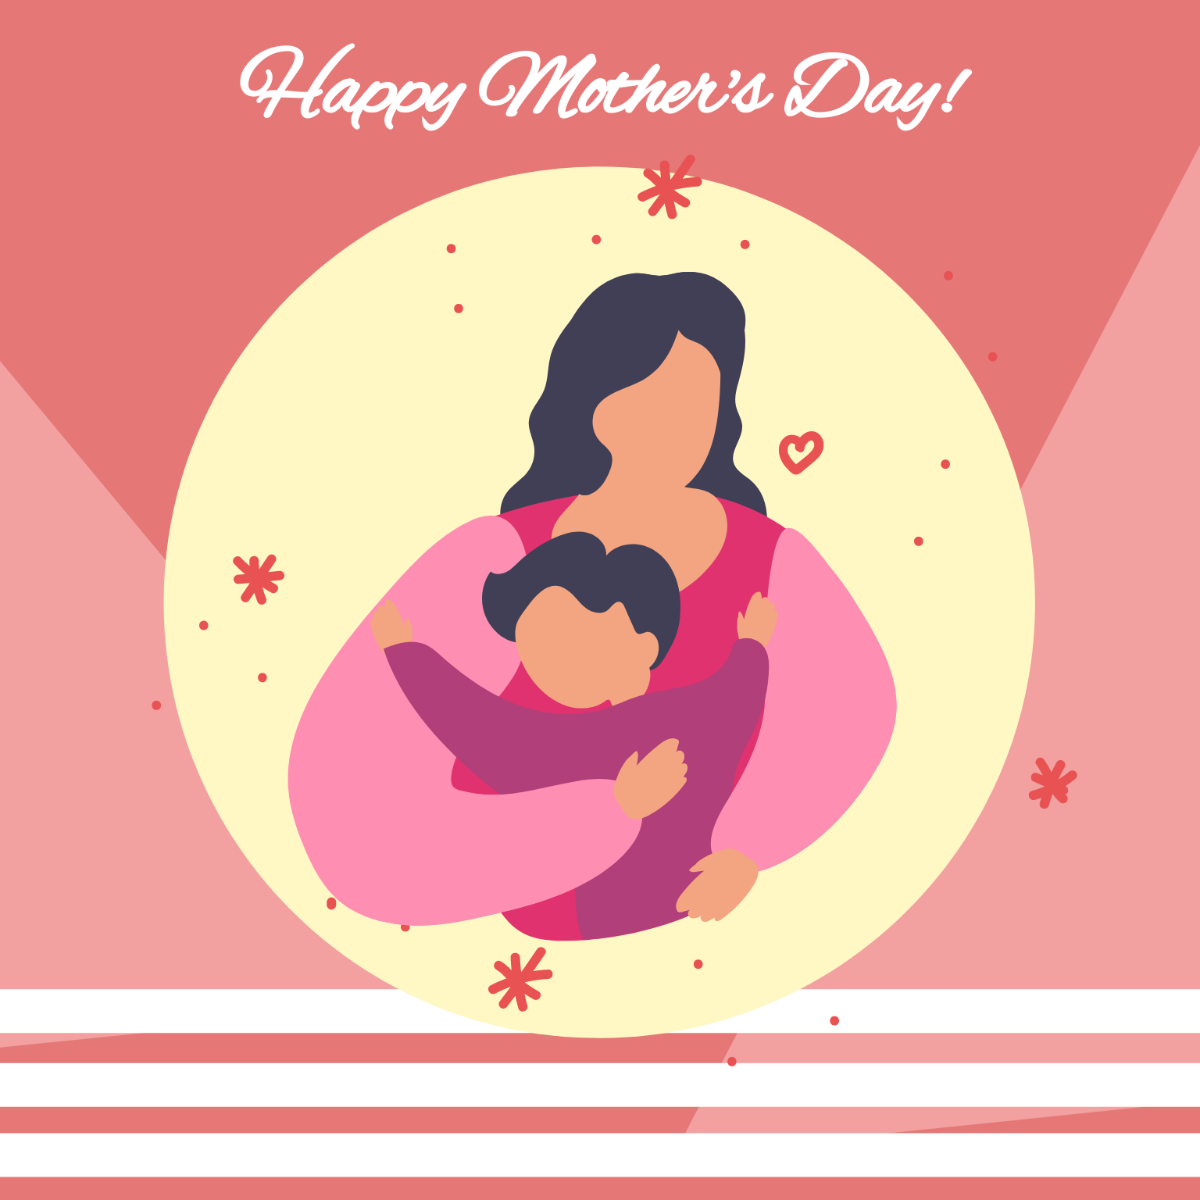 Happy Mother's Day Illustration Template